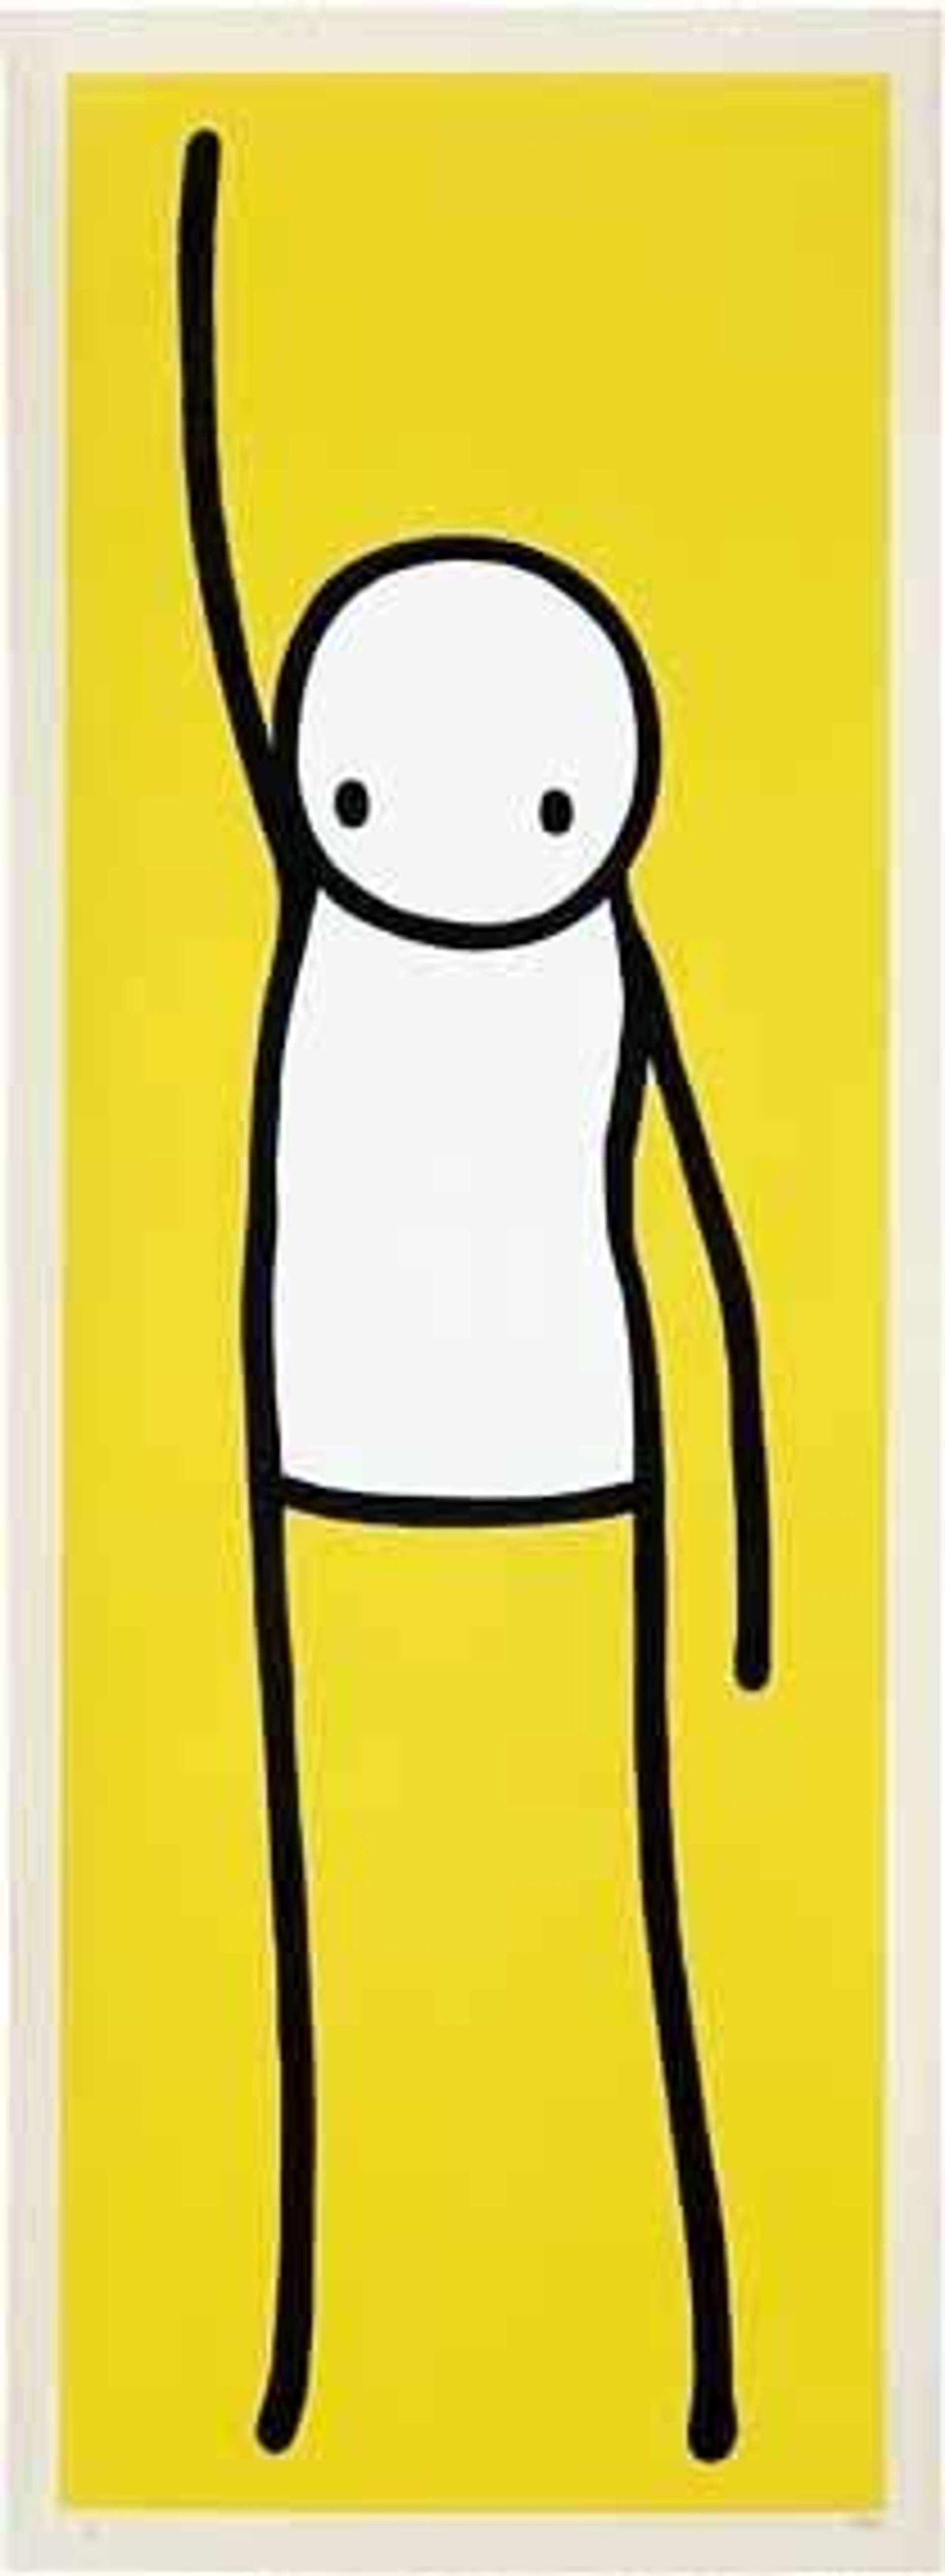 STIK’s Liberty (yellow). A screenprint of a stick figure with one arm raised in the air against a yellow background.